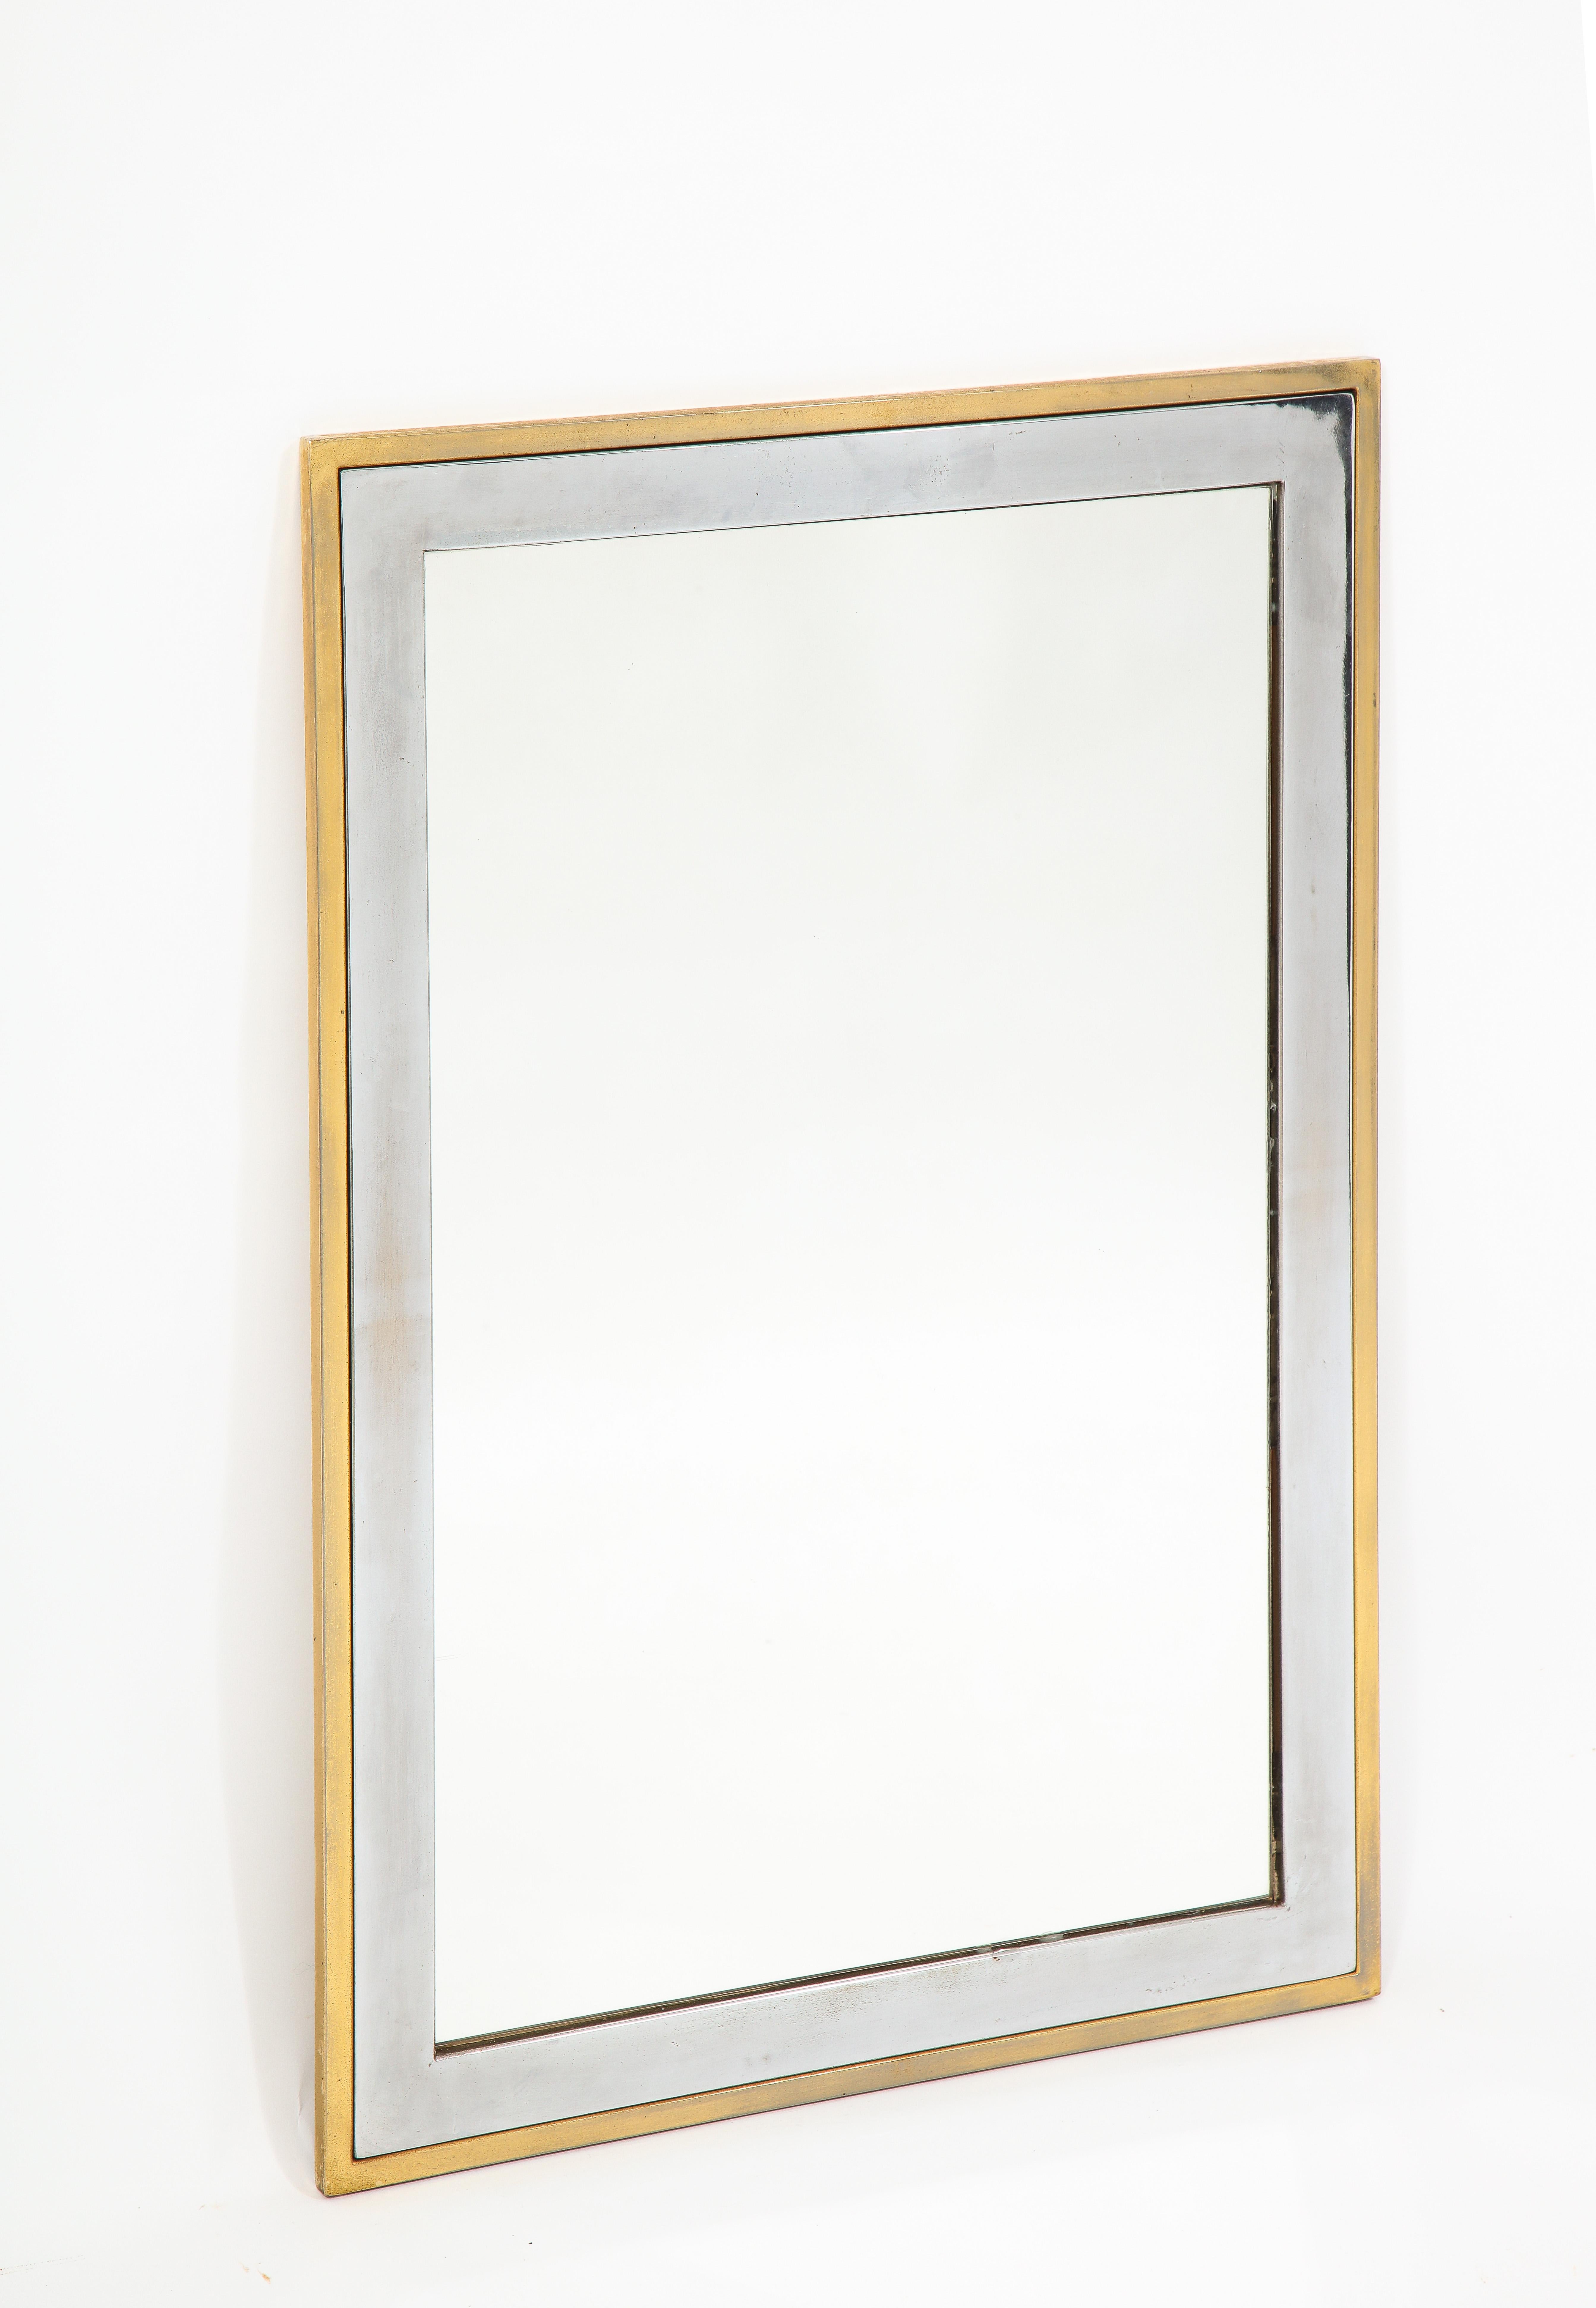 Nickel and Brass Rectangular Mixed Metal Mirror, France 1960's For Sale 2